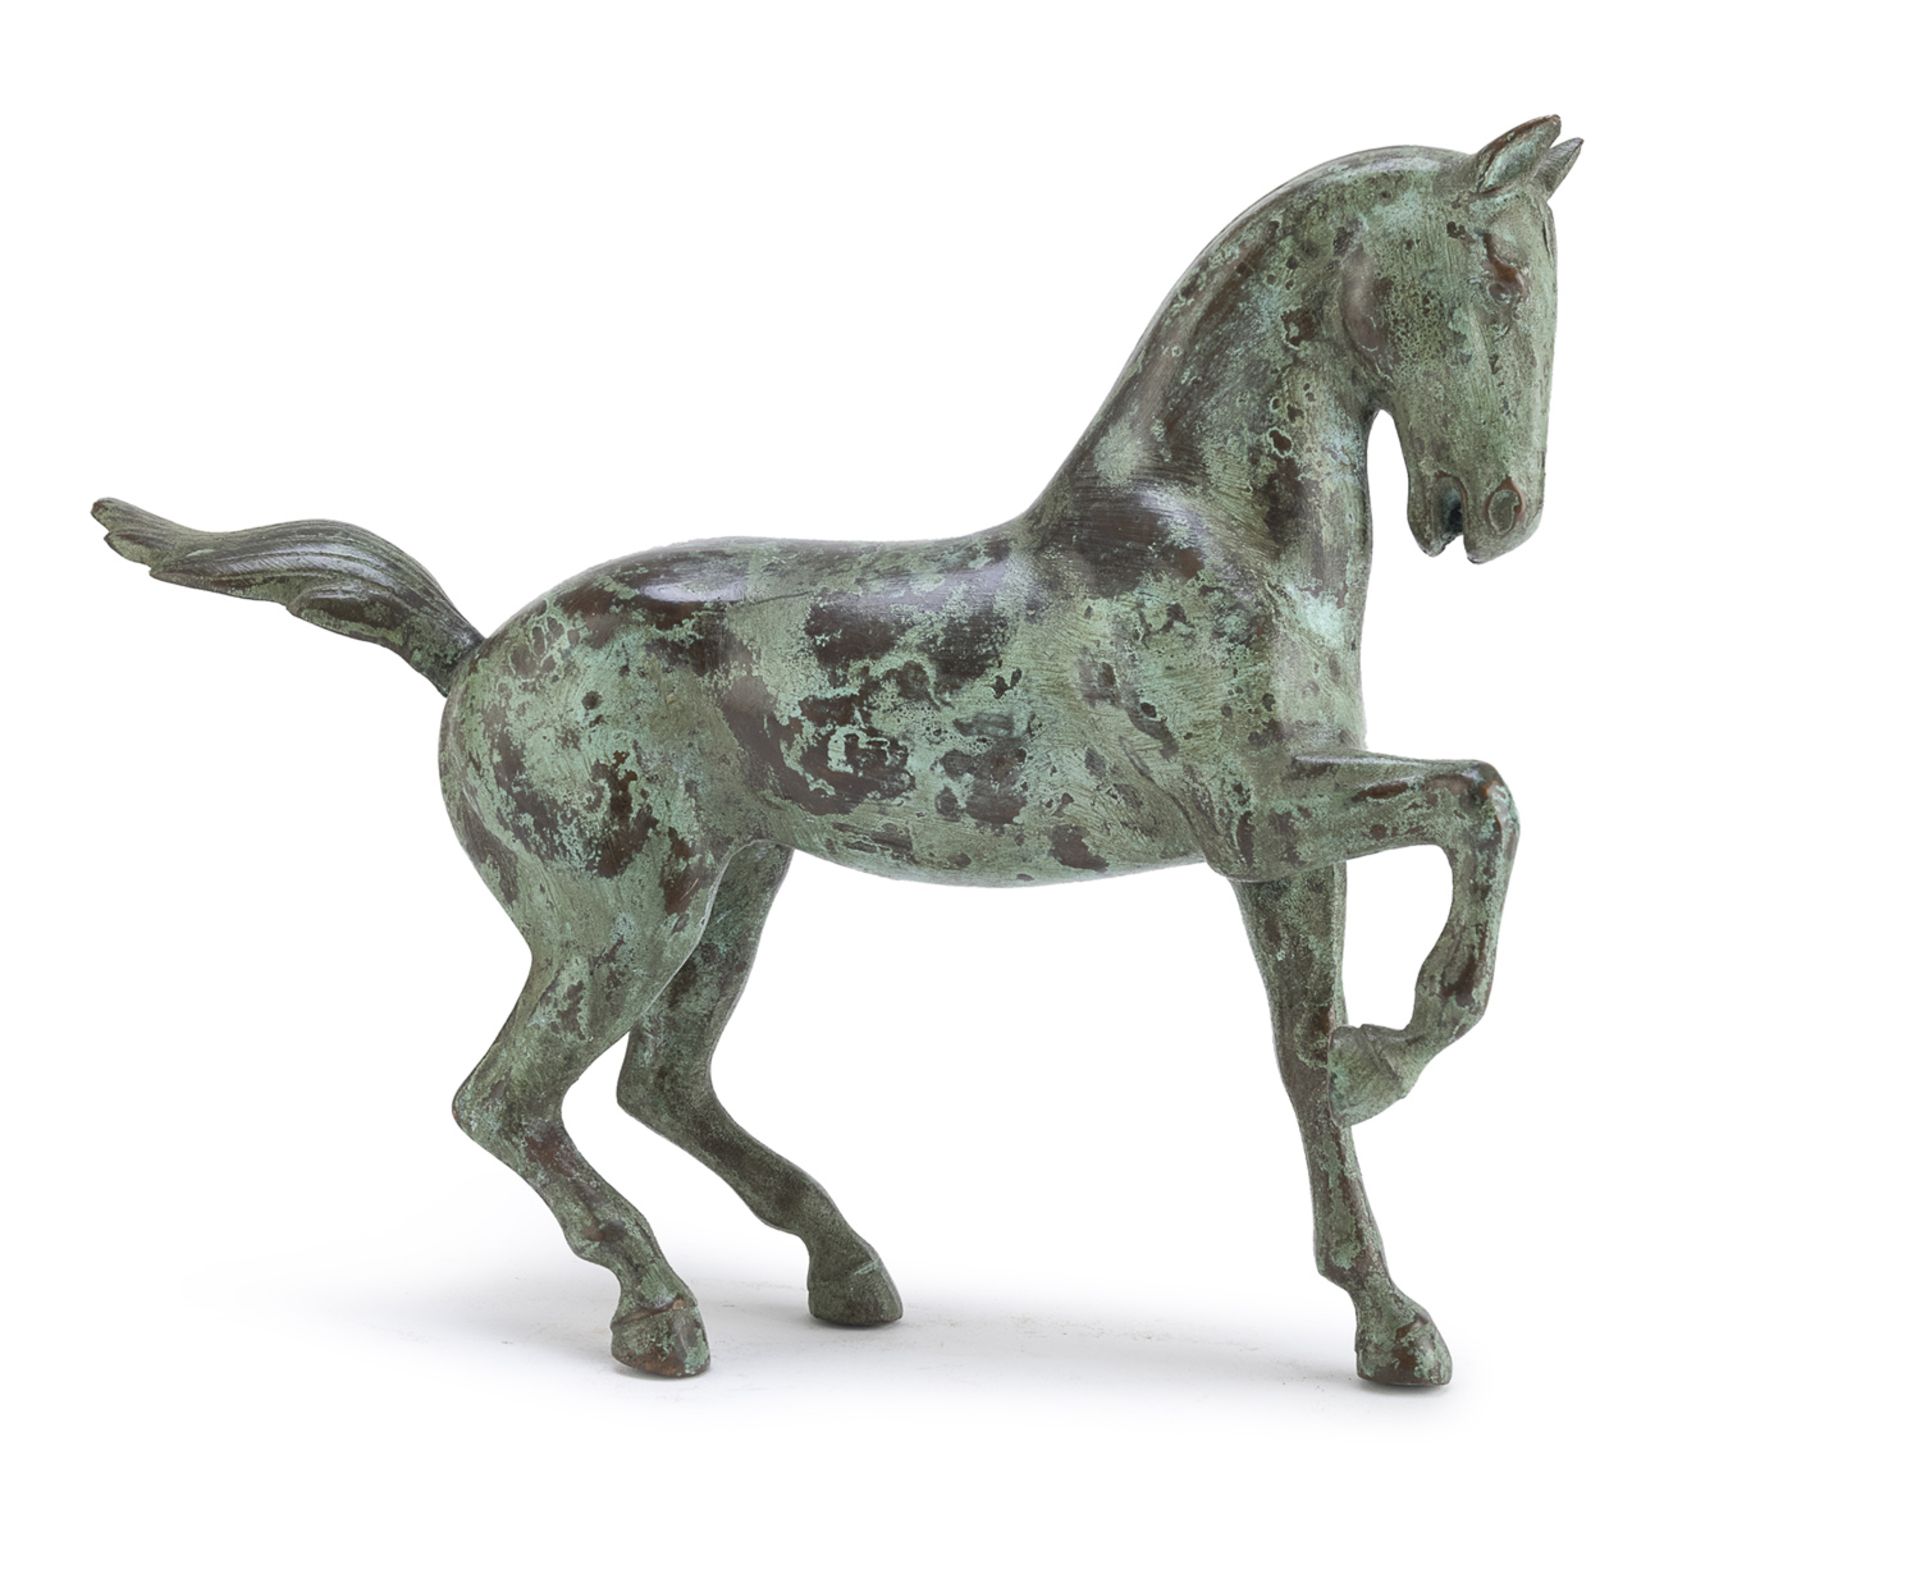 BRONZE SCULPTURE OF HORSE ARCHAEOLOGICAL STYLE 20th CENTURY